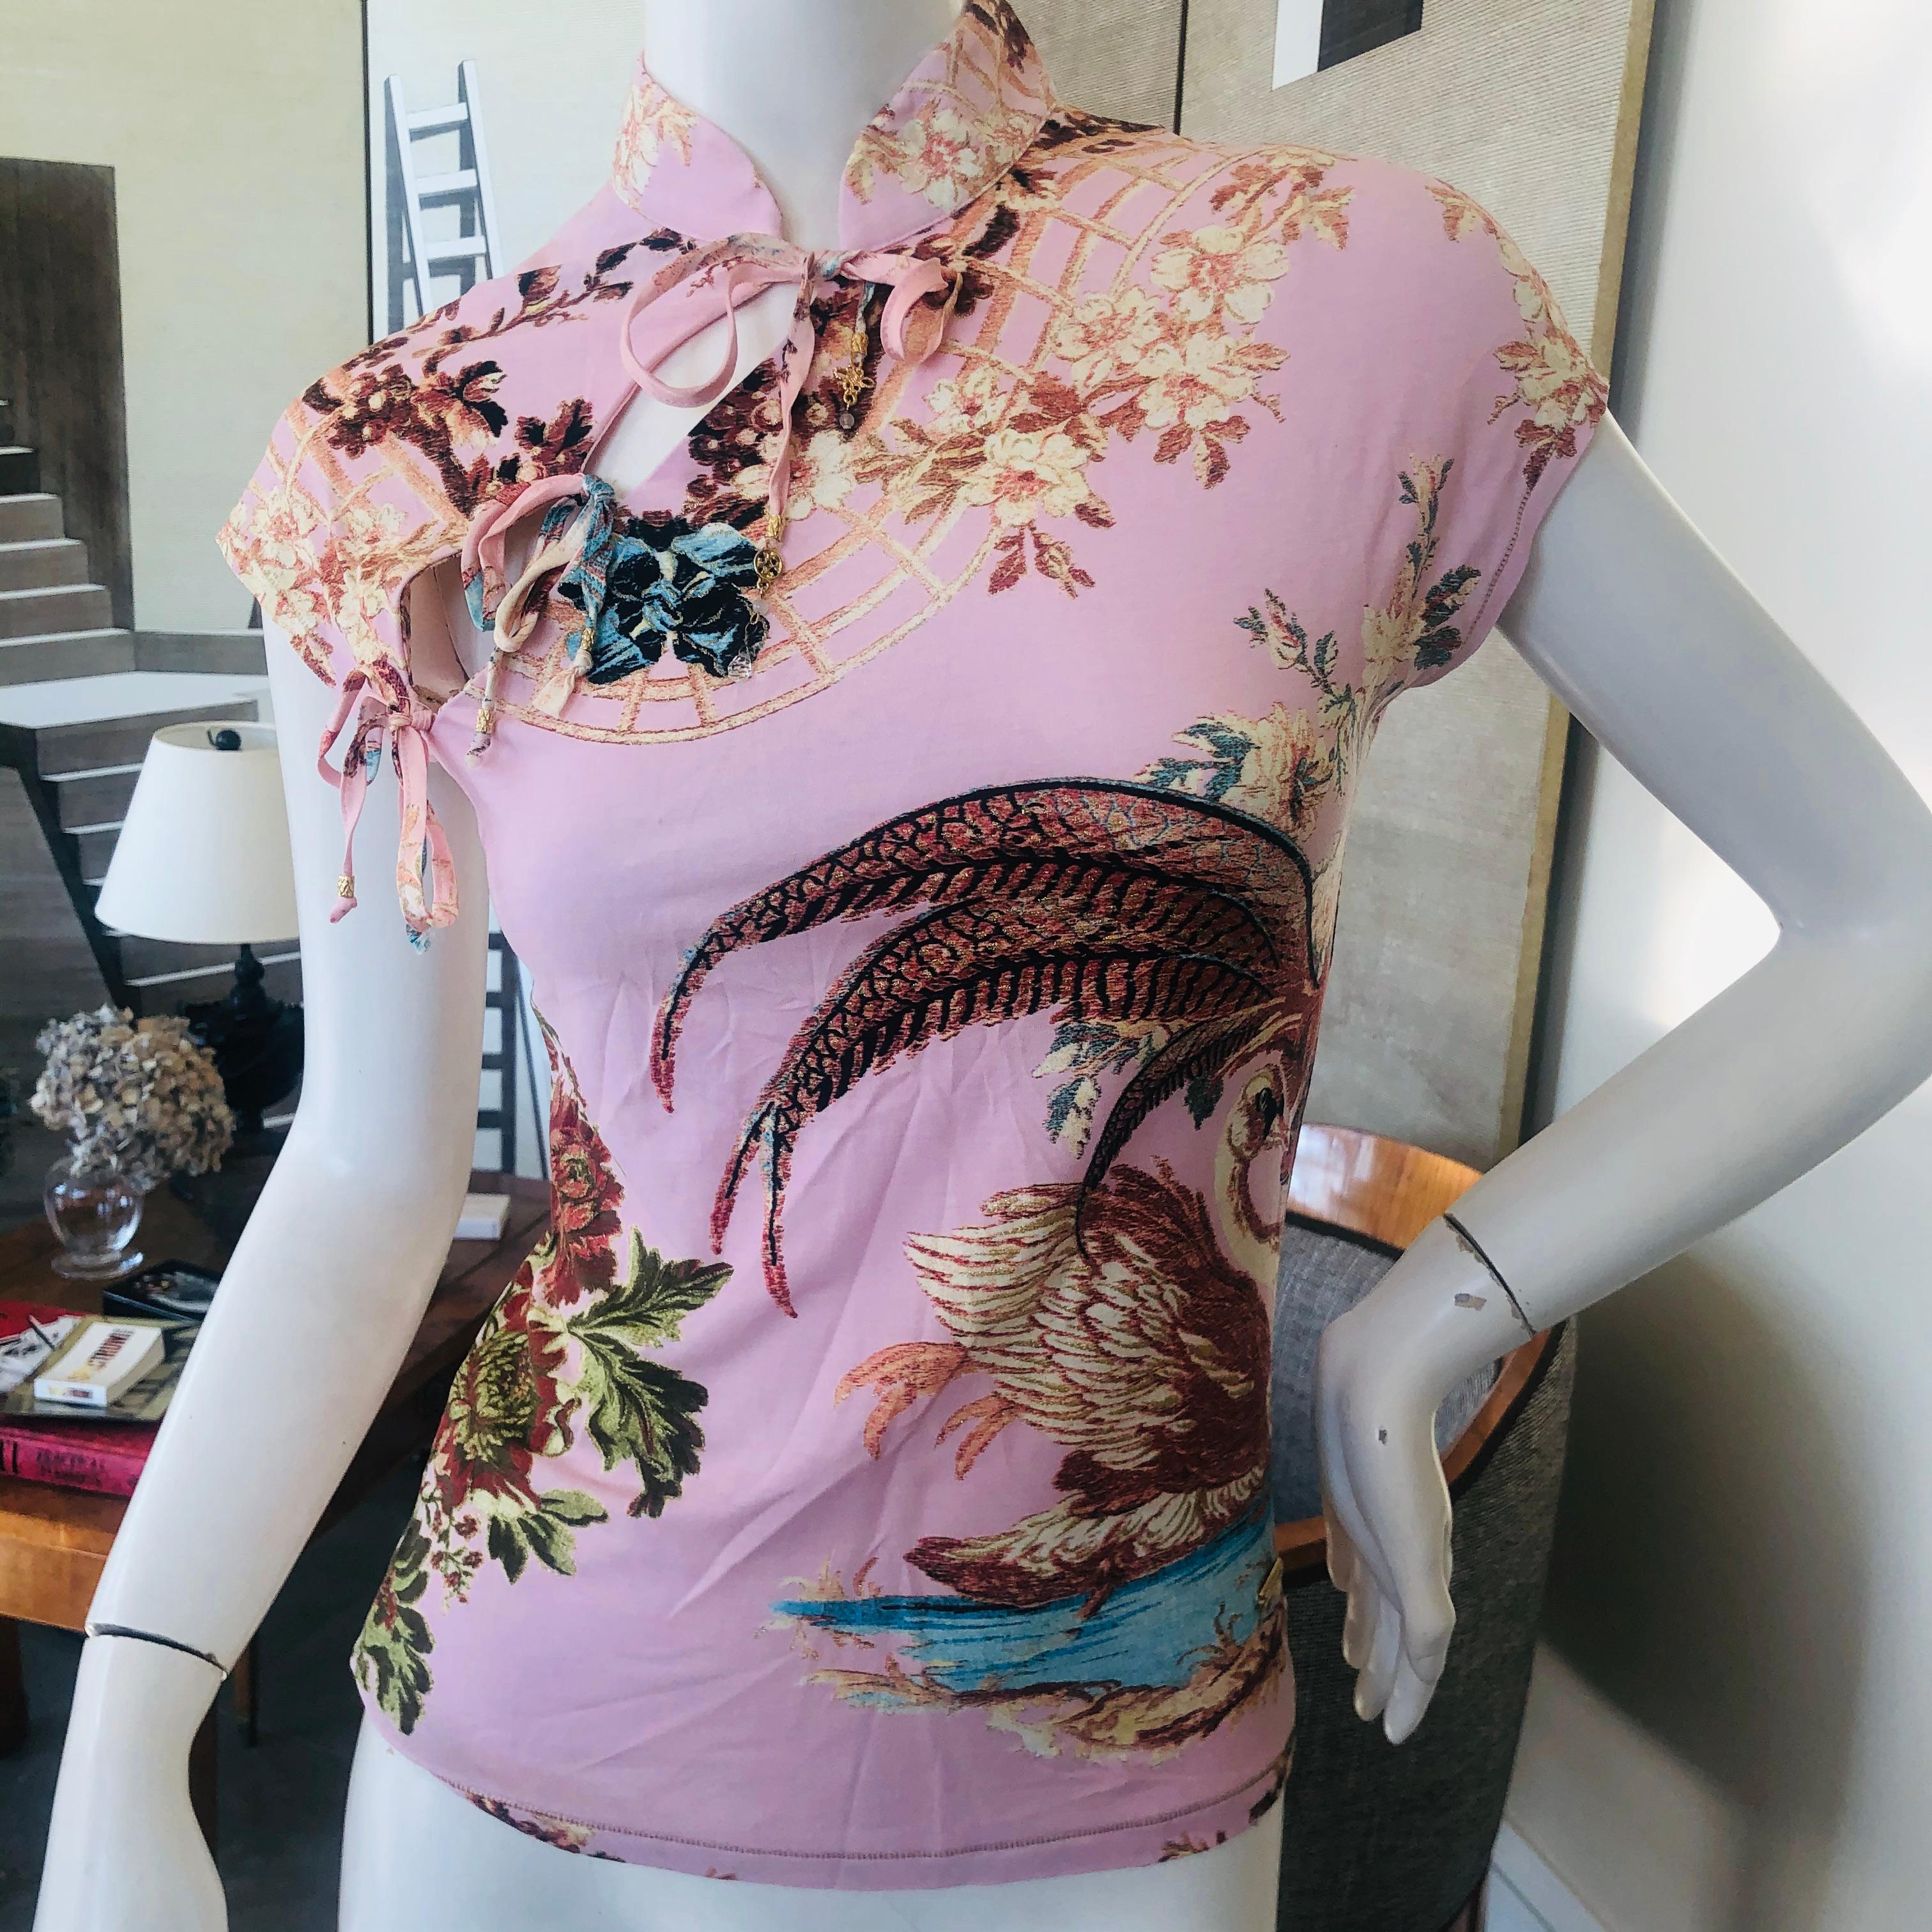 Roberto Cavalli 2003 Pink Pheasant Pattern Cheongsam Style Top 
Size M, runs small, there is a lot of stretch.
Bust 35